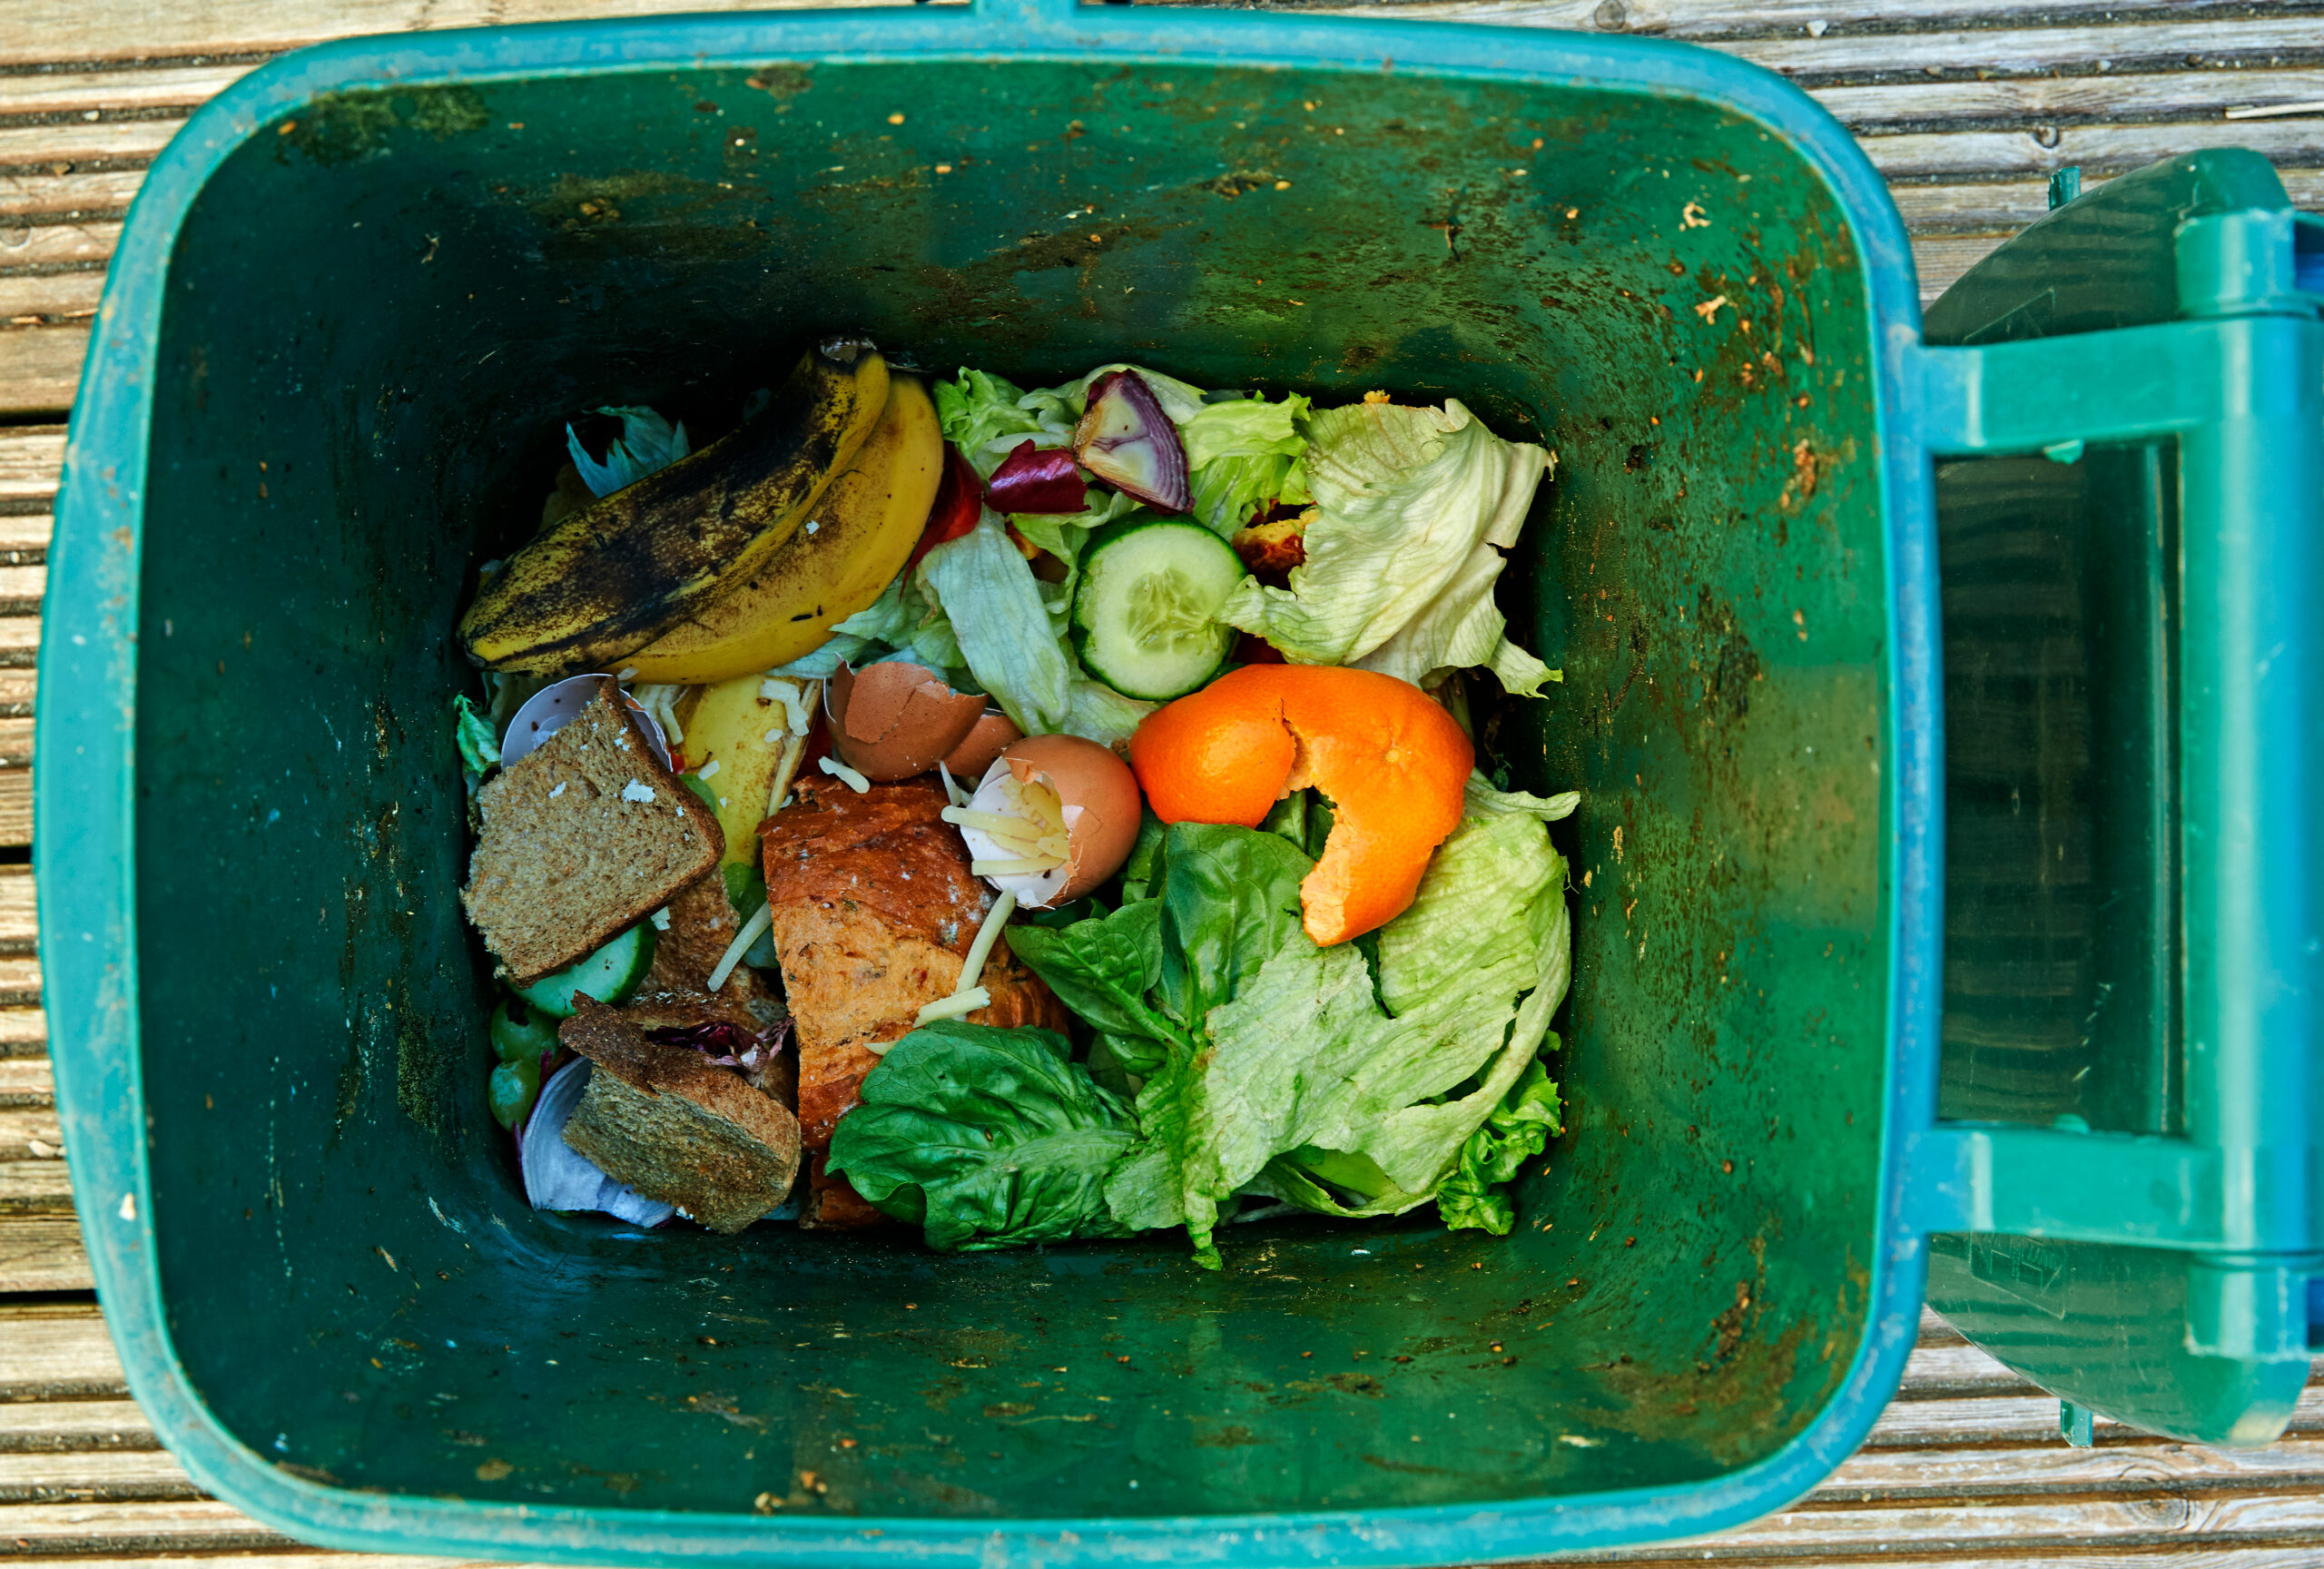 https://www.letsrecycle.com/wp-content/uploads/2023/03/Food-waste-2-scaled.jpg